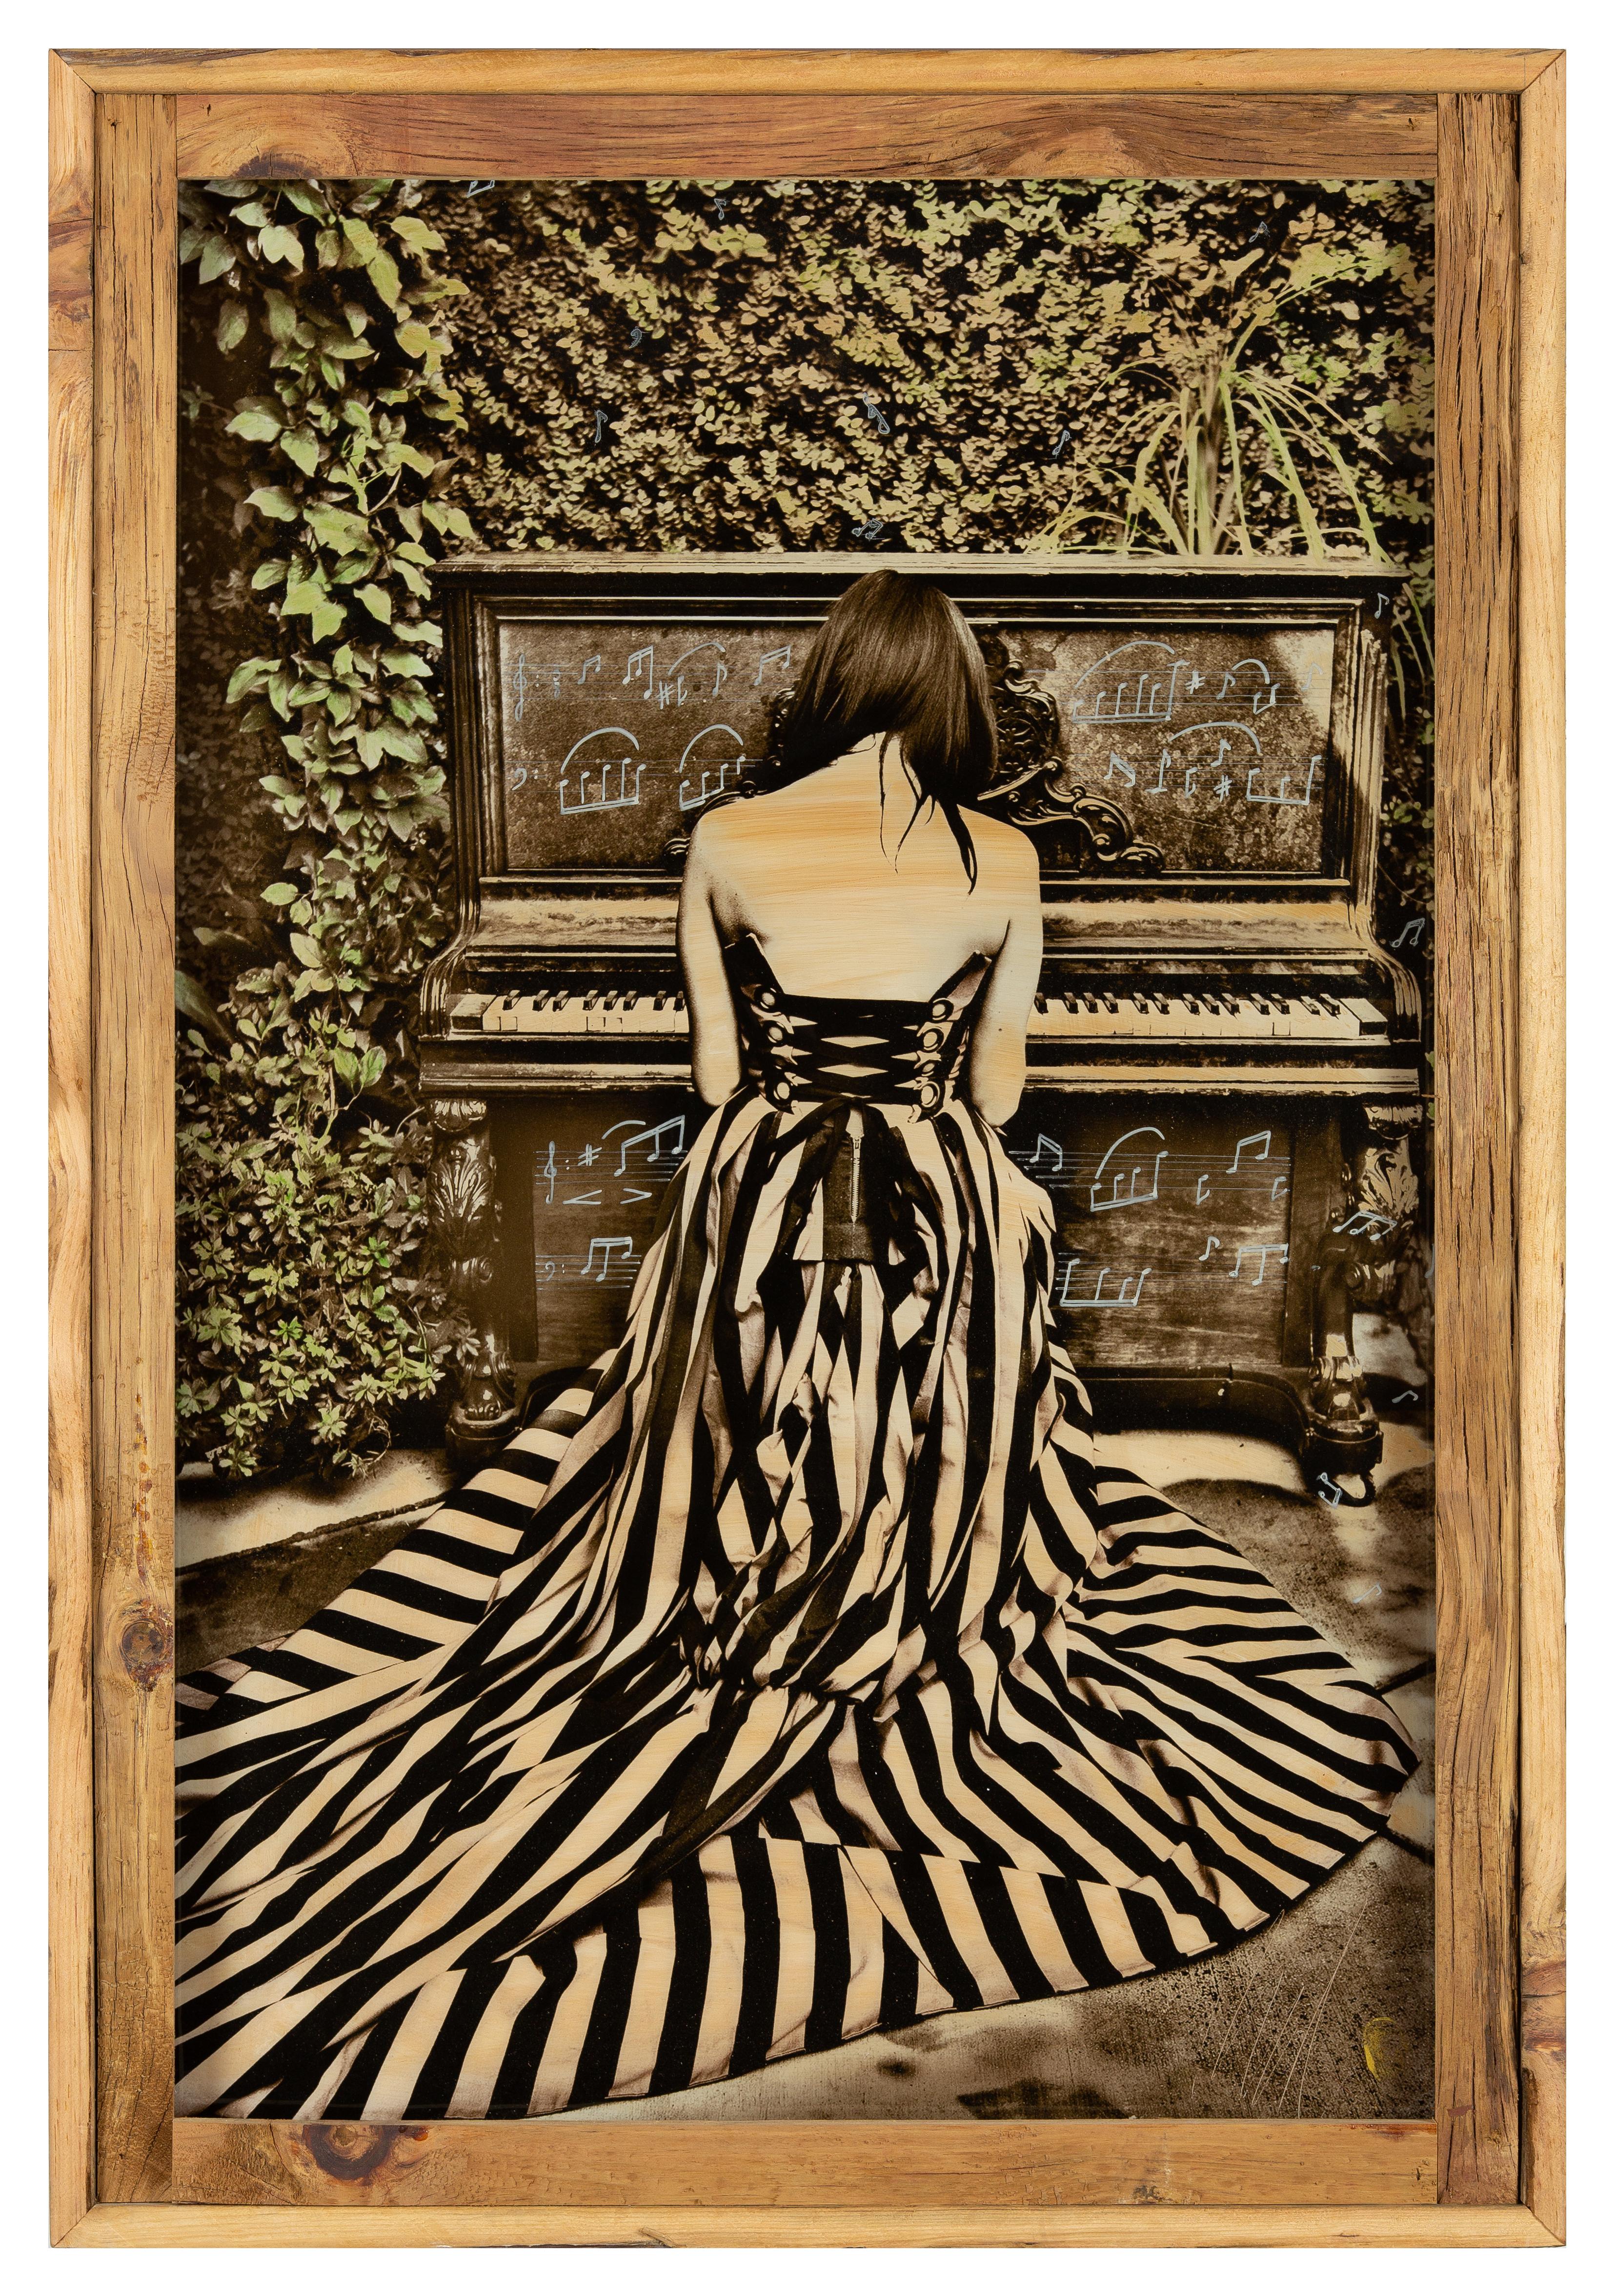 Piano Girl - Photograph by Raphael Mazzucco